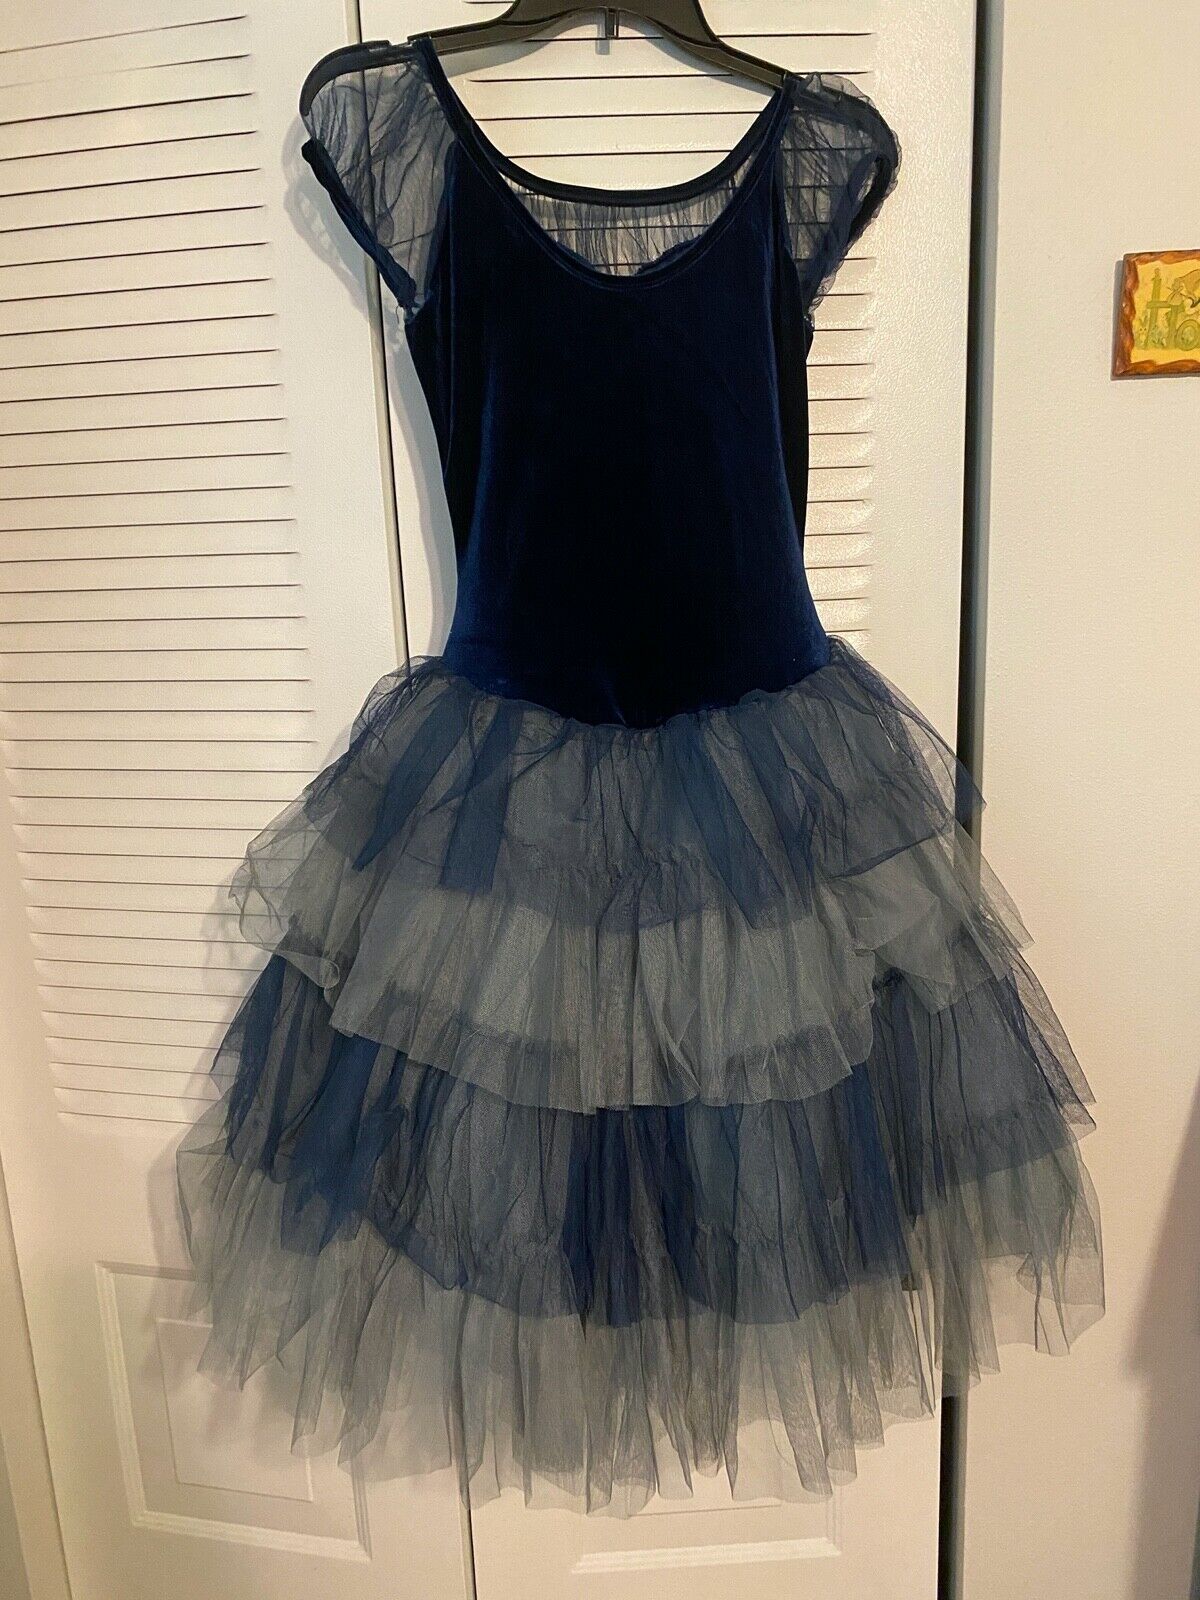 BEAUTIFUL BALLET COSTUME SIZE ADULT SMALL - image 3